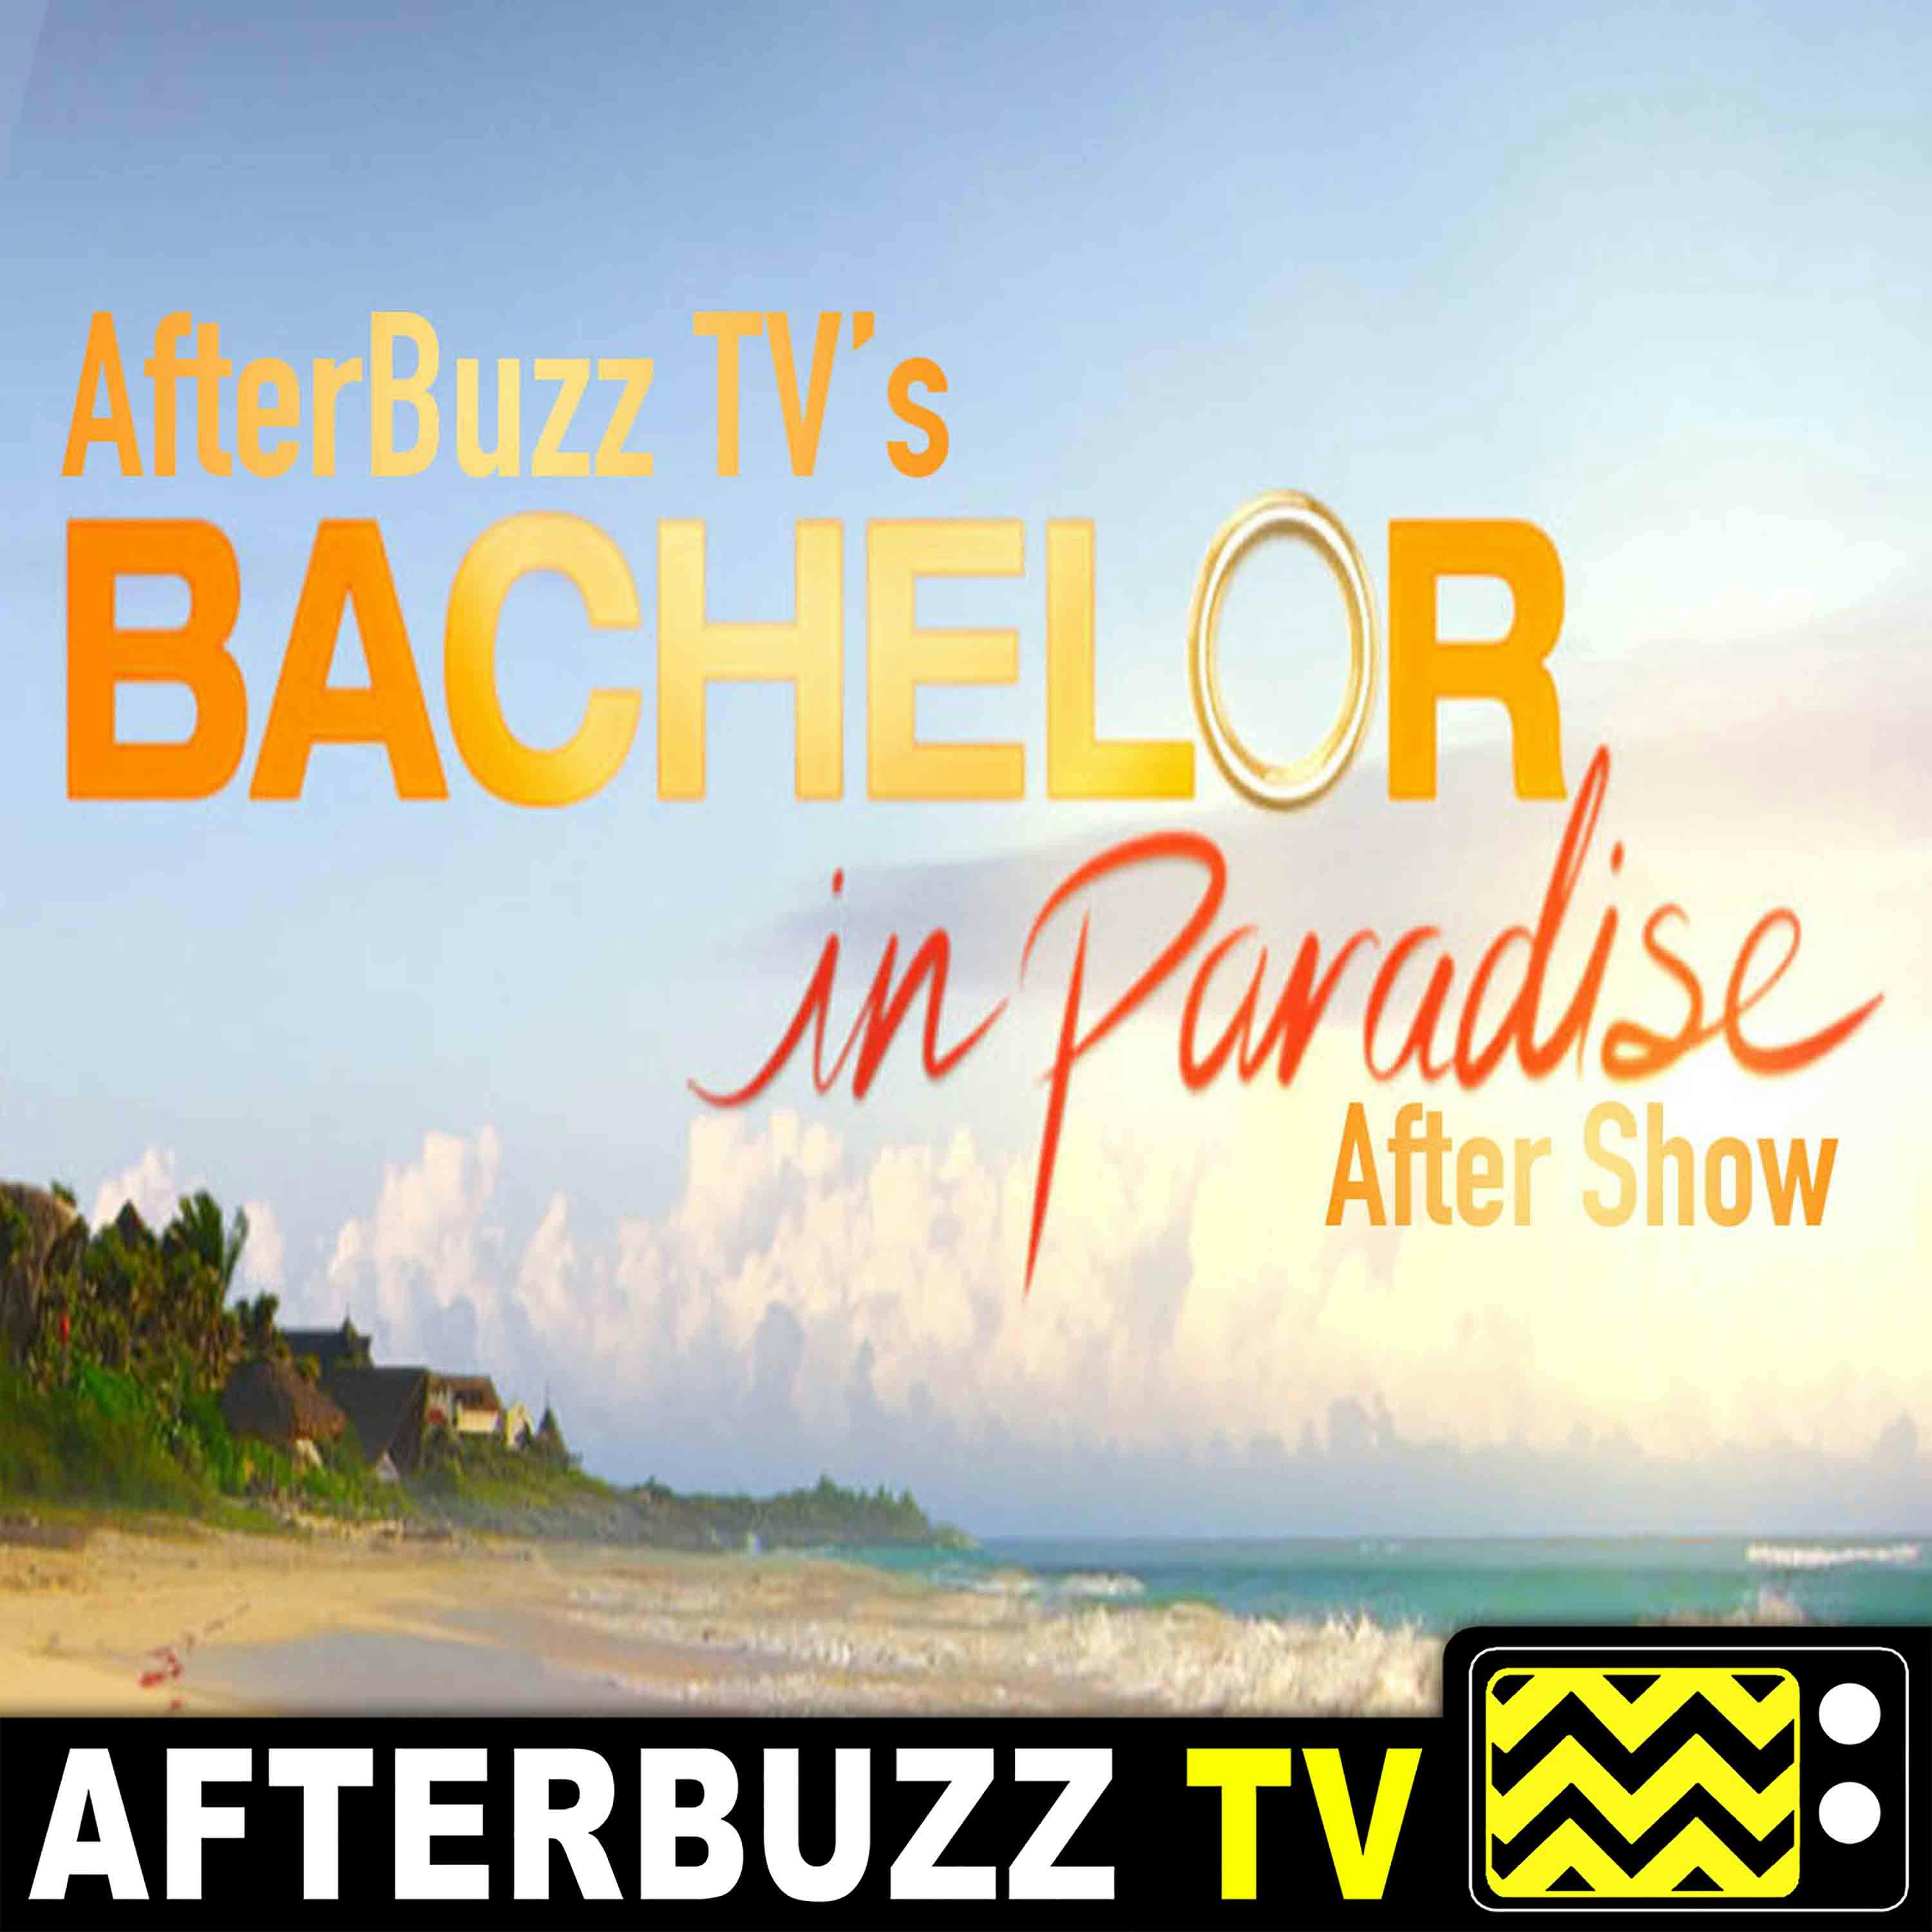 The Bachelor in Paradise Podcast